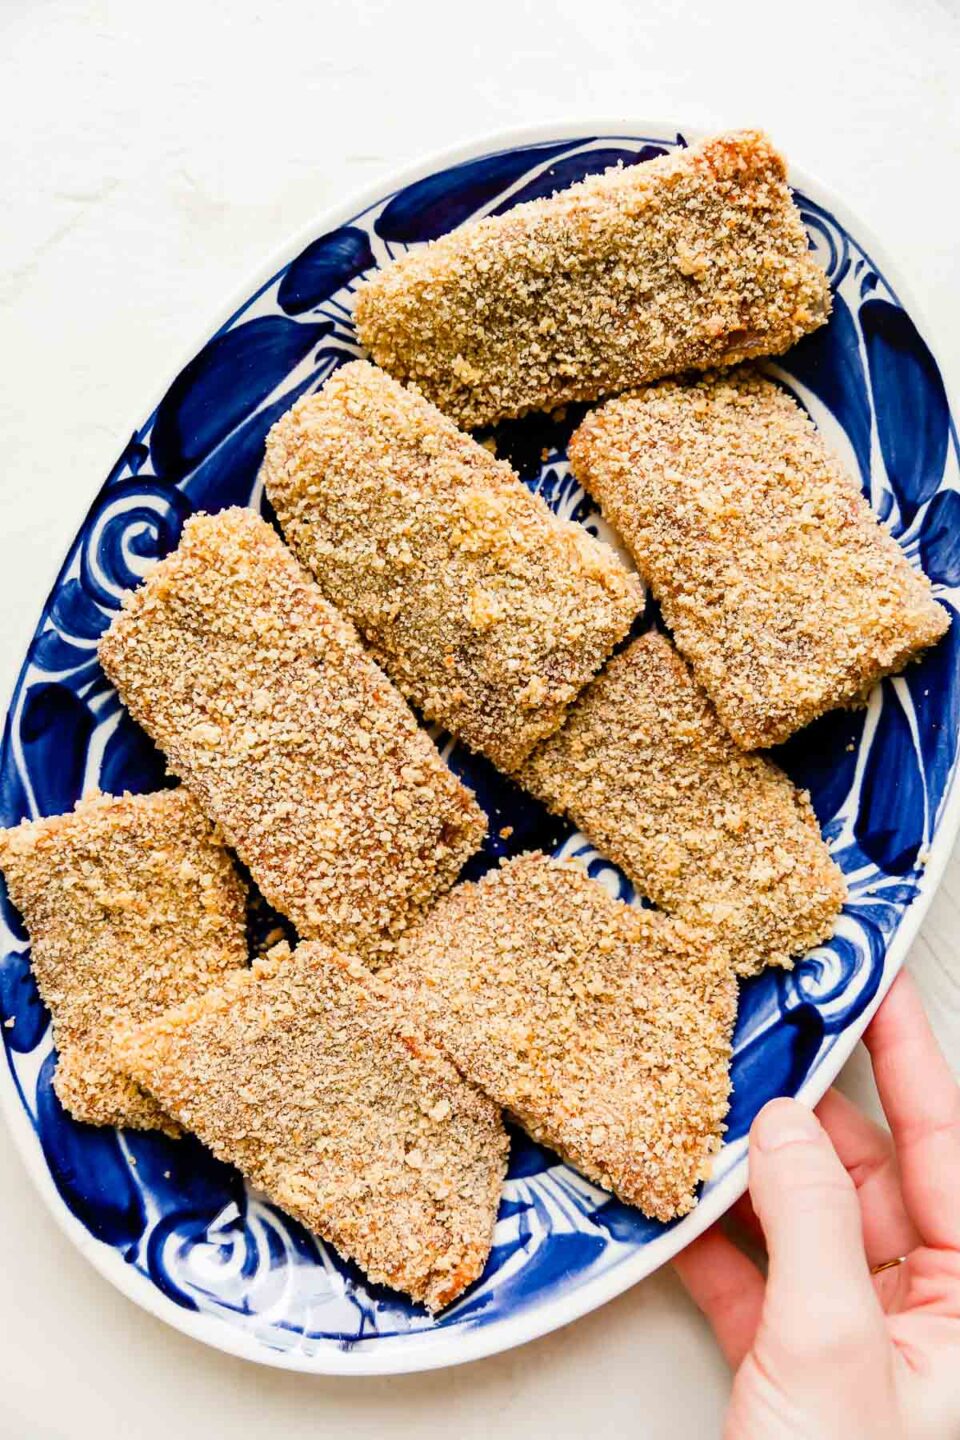 Eight panko crusted white fish fillets are arranged atop a white and blue painted platter. The platter sits atop a creamy white textured surface and a woman's hand holds the platter on one side.